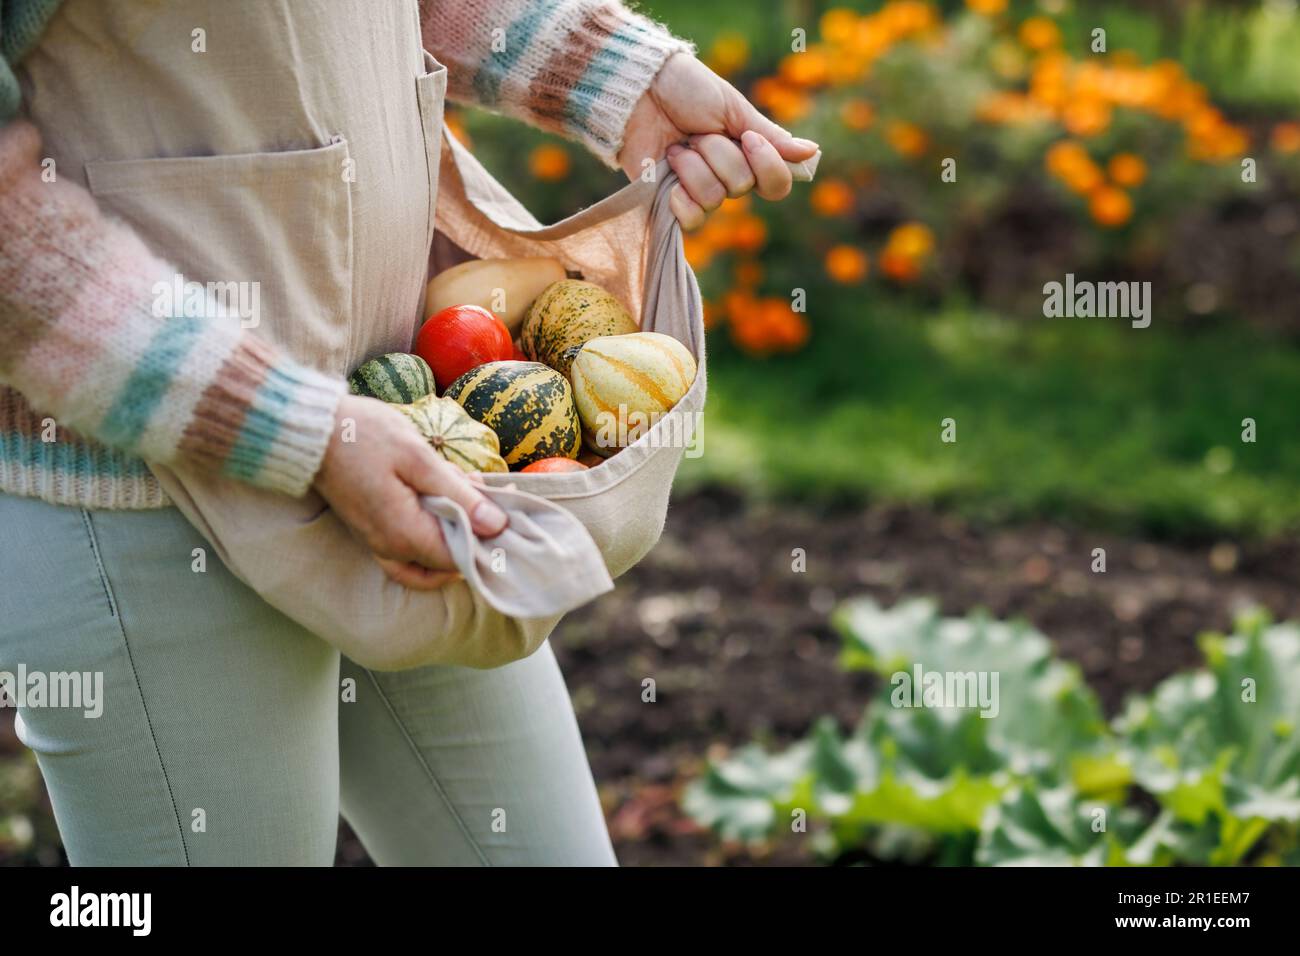 Woman holding harvested decorative pumpkins in apron at autumn garden Stock Photo